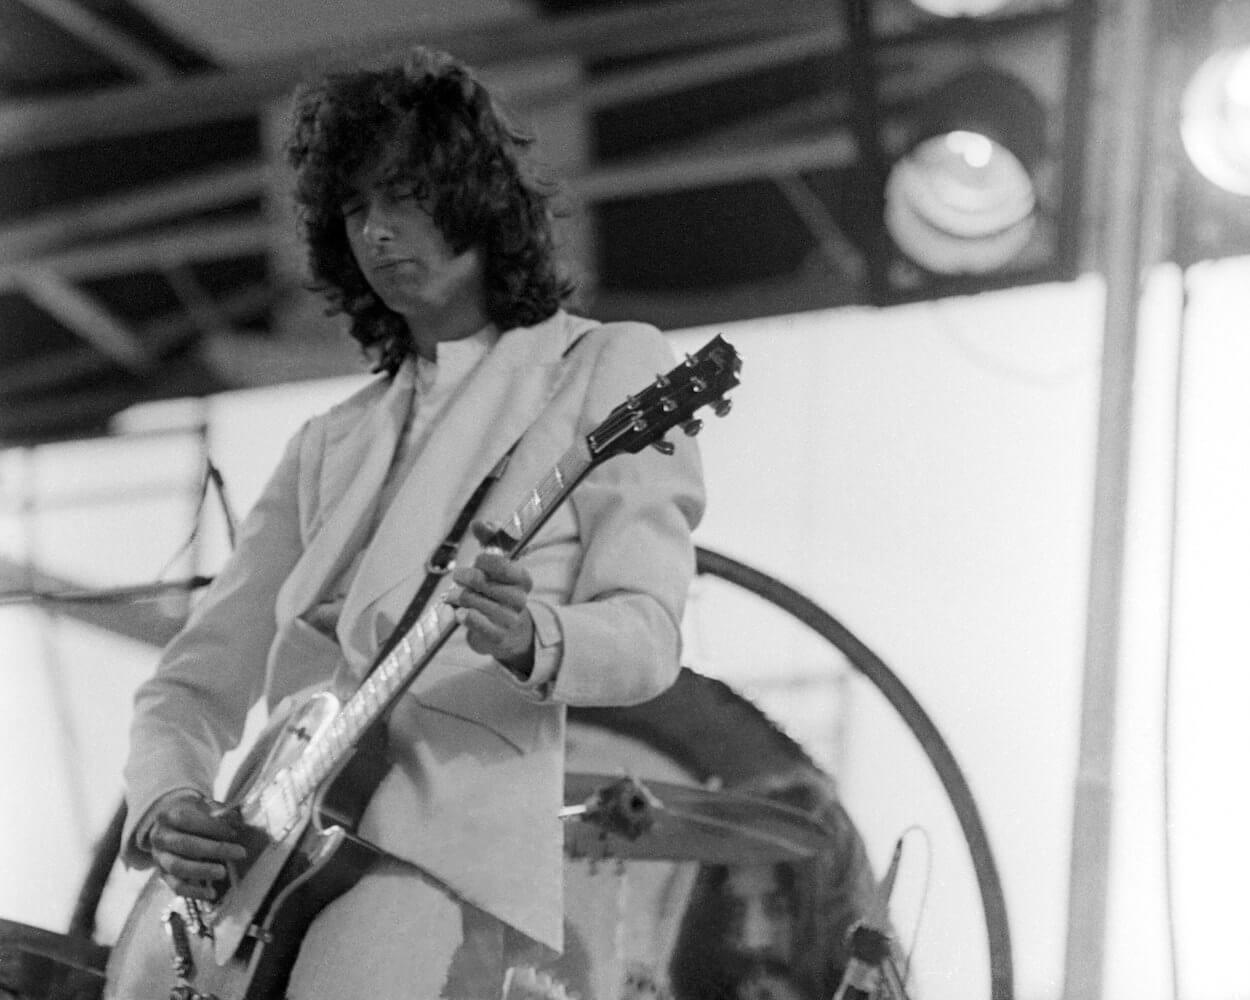 Led Zeppelin's Jimmy Page wears a light-colored suit while playing guitar during a 1973 concert.